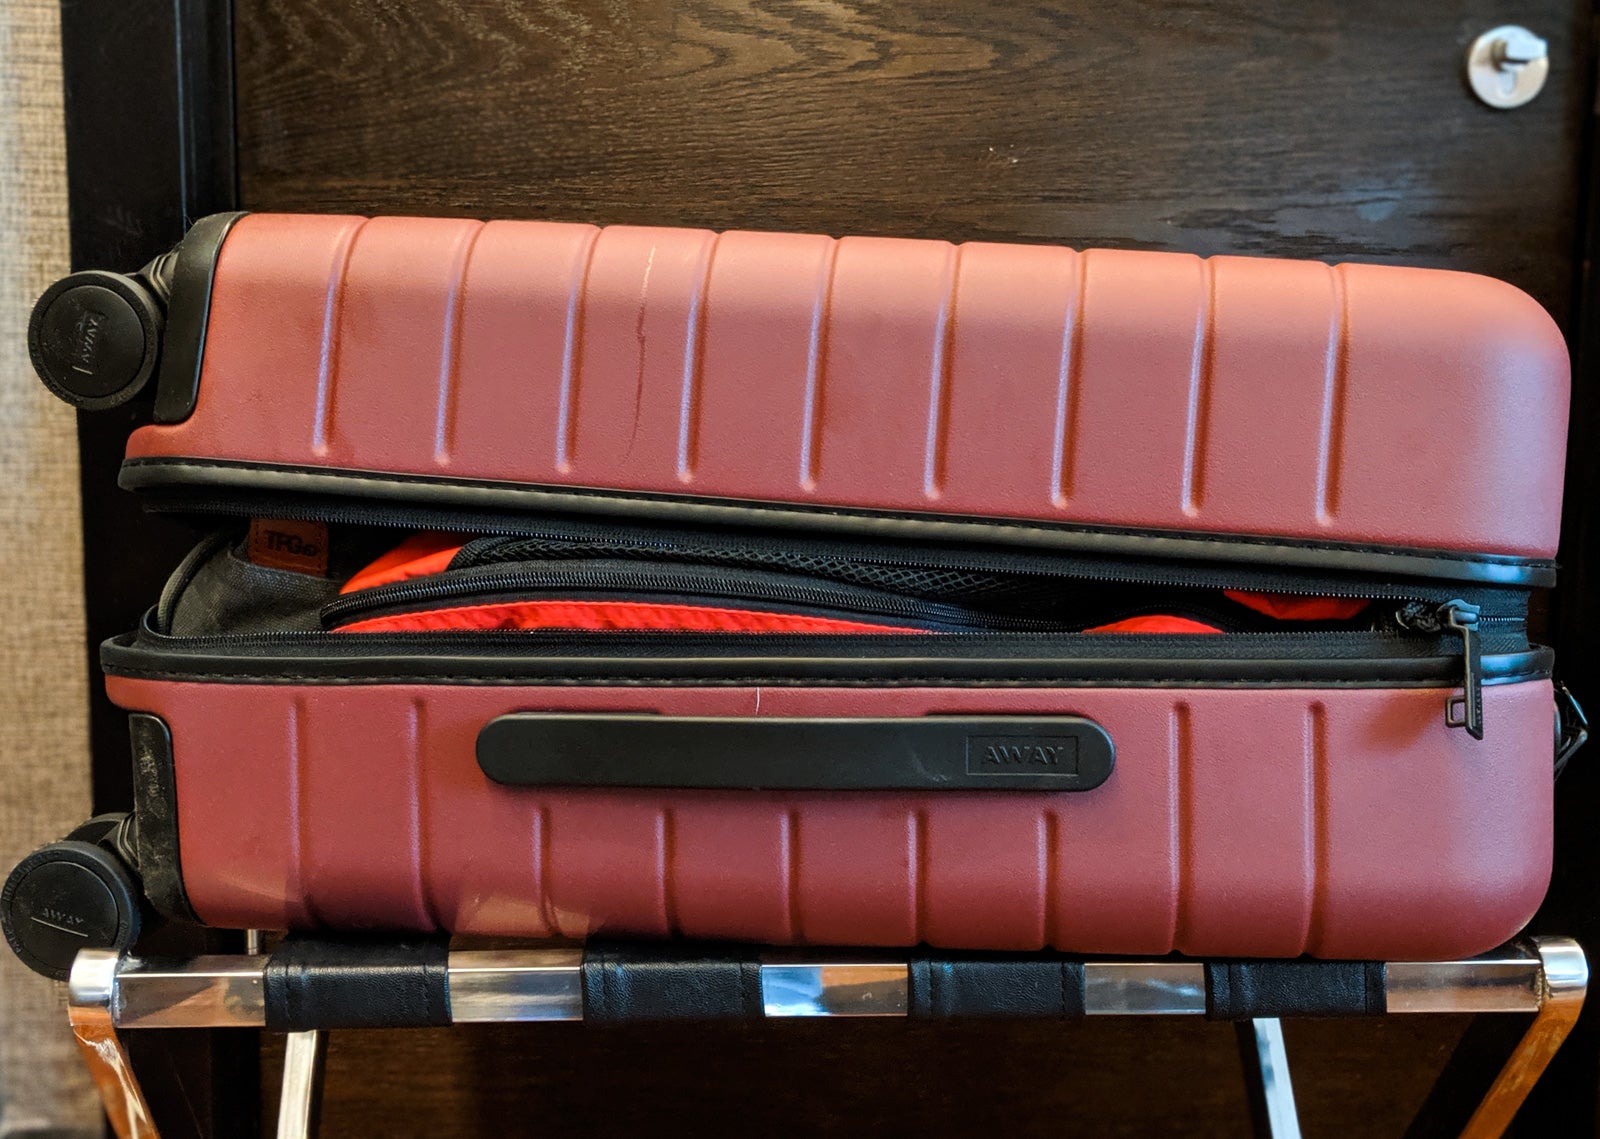 10 tips for traveling with valuable luggage and handbags - The Points Guy